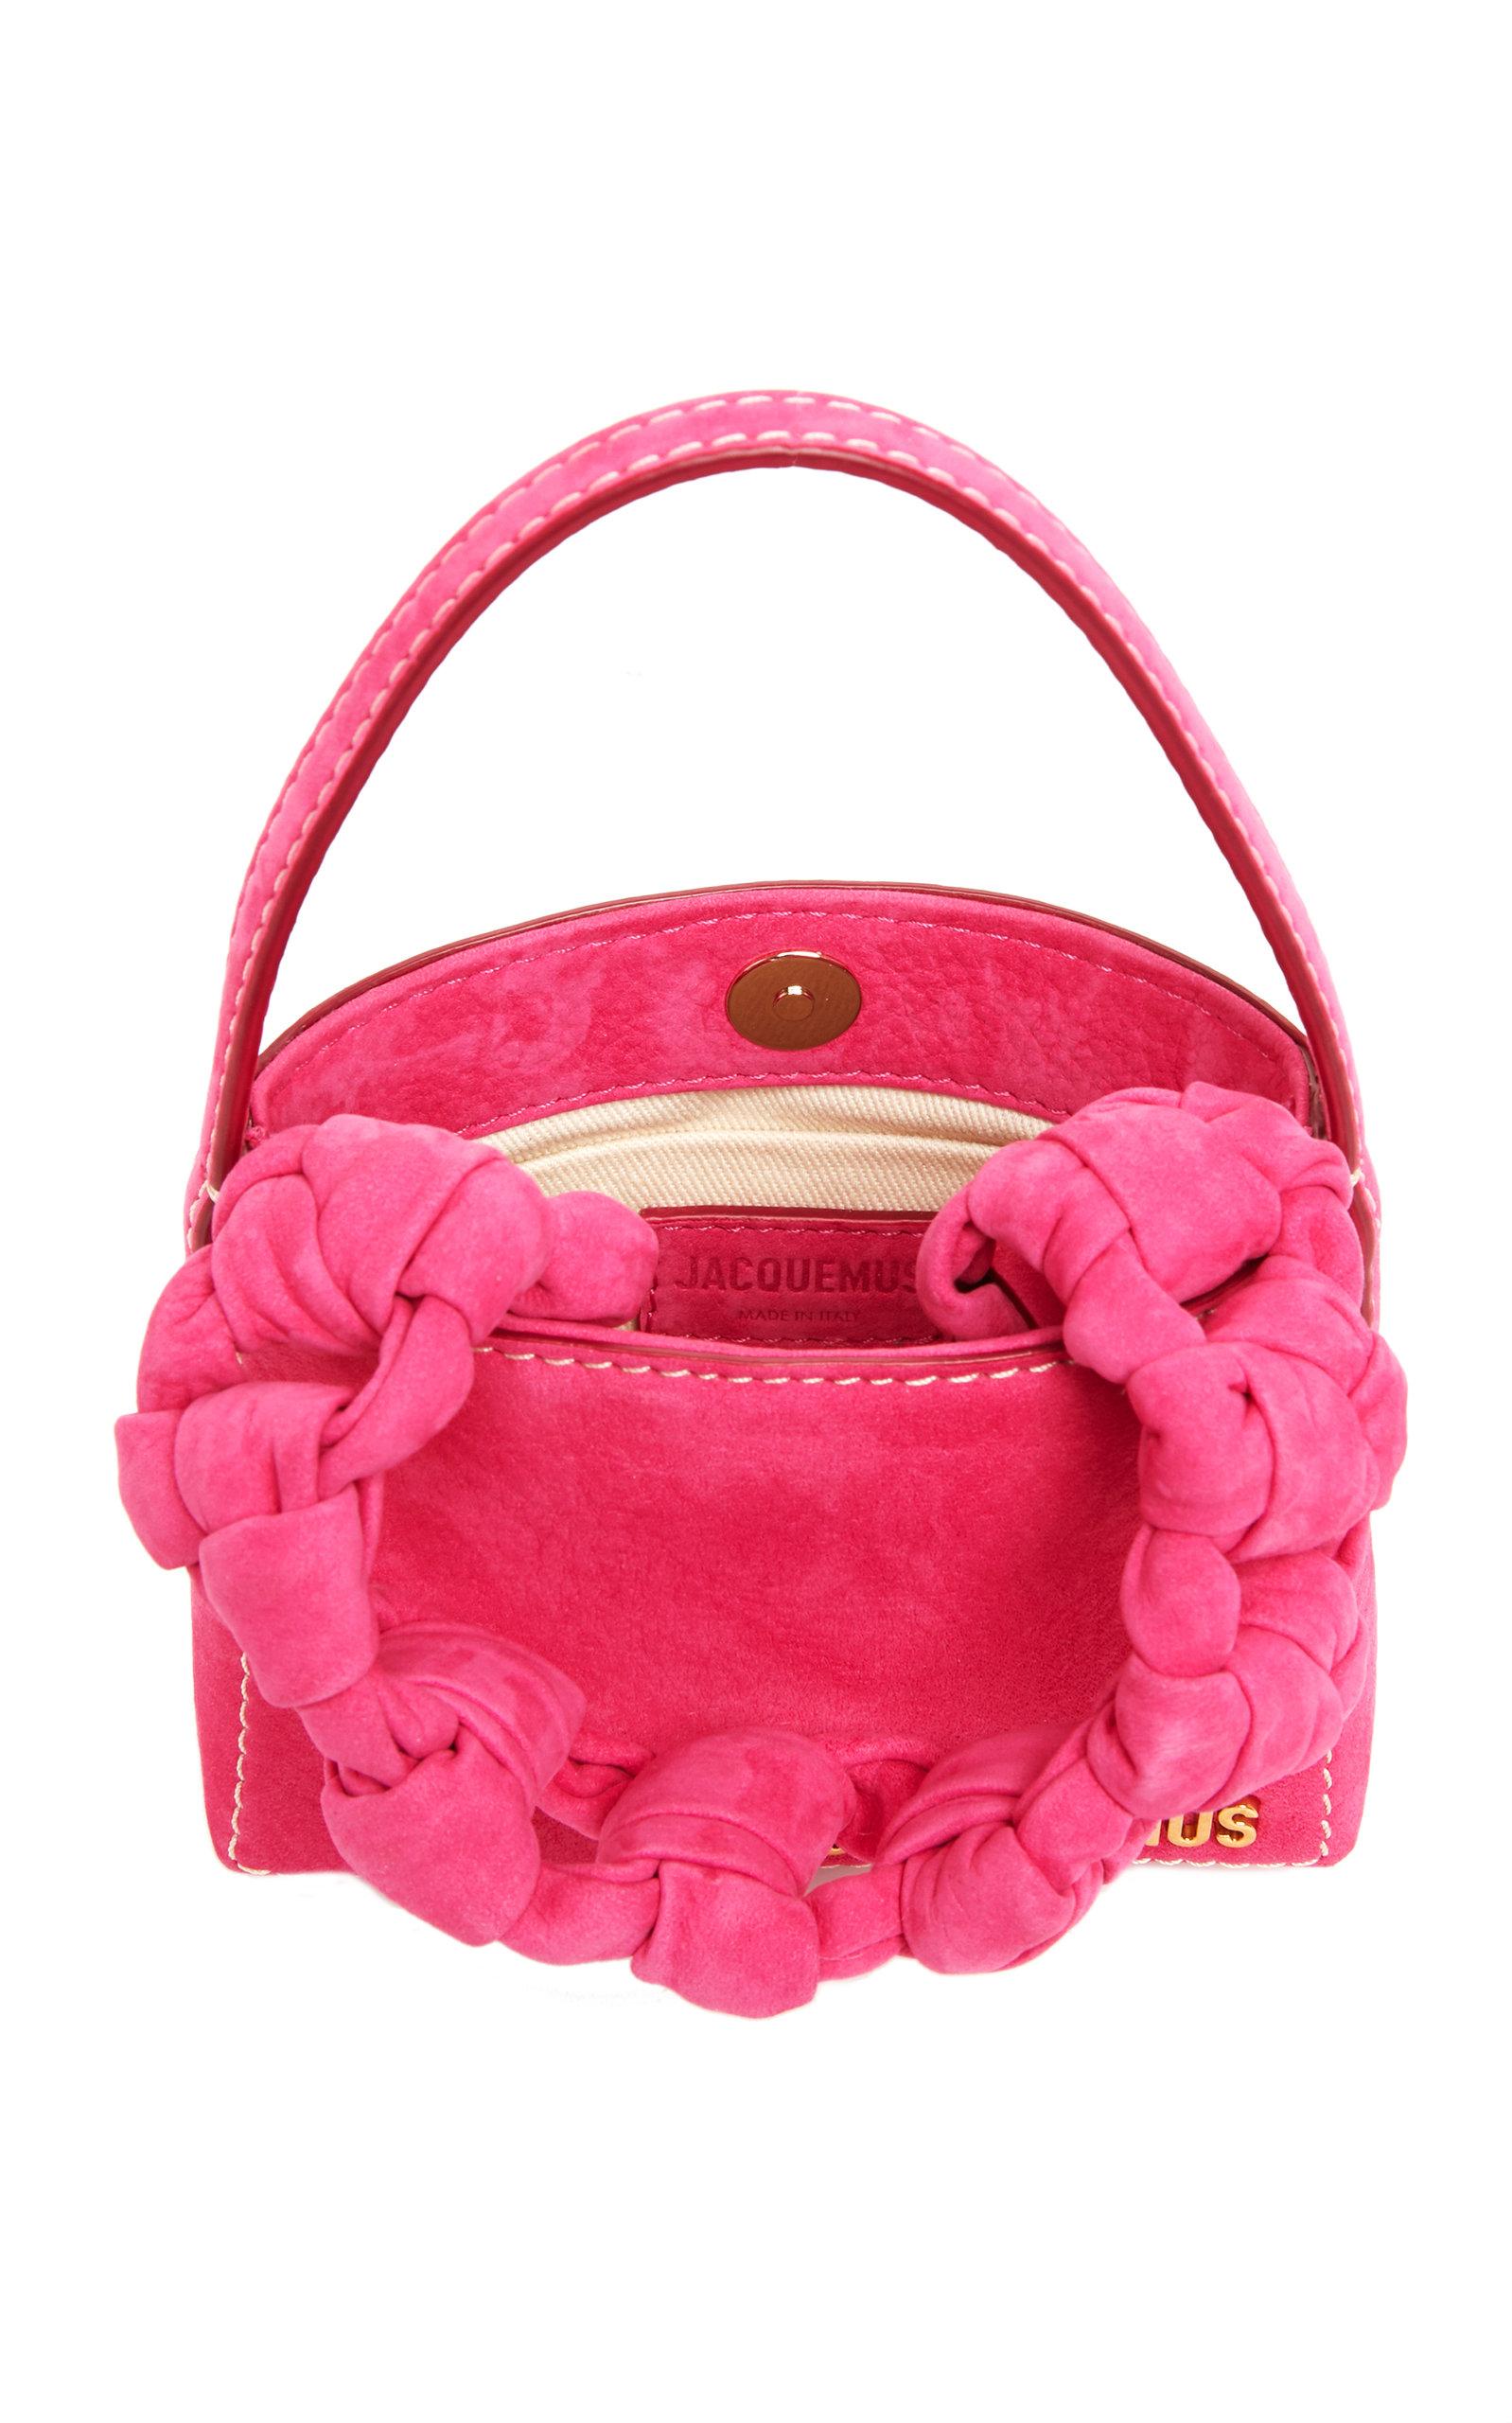 Jacquemus Le Petit Sac Noeud Leather Top Handle Bag in Pink - Lyst